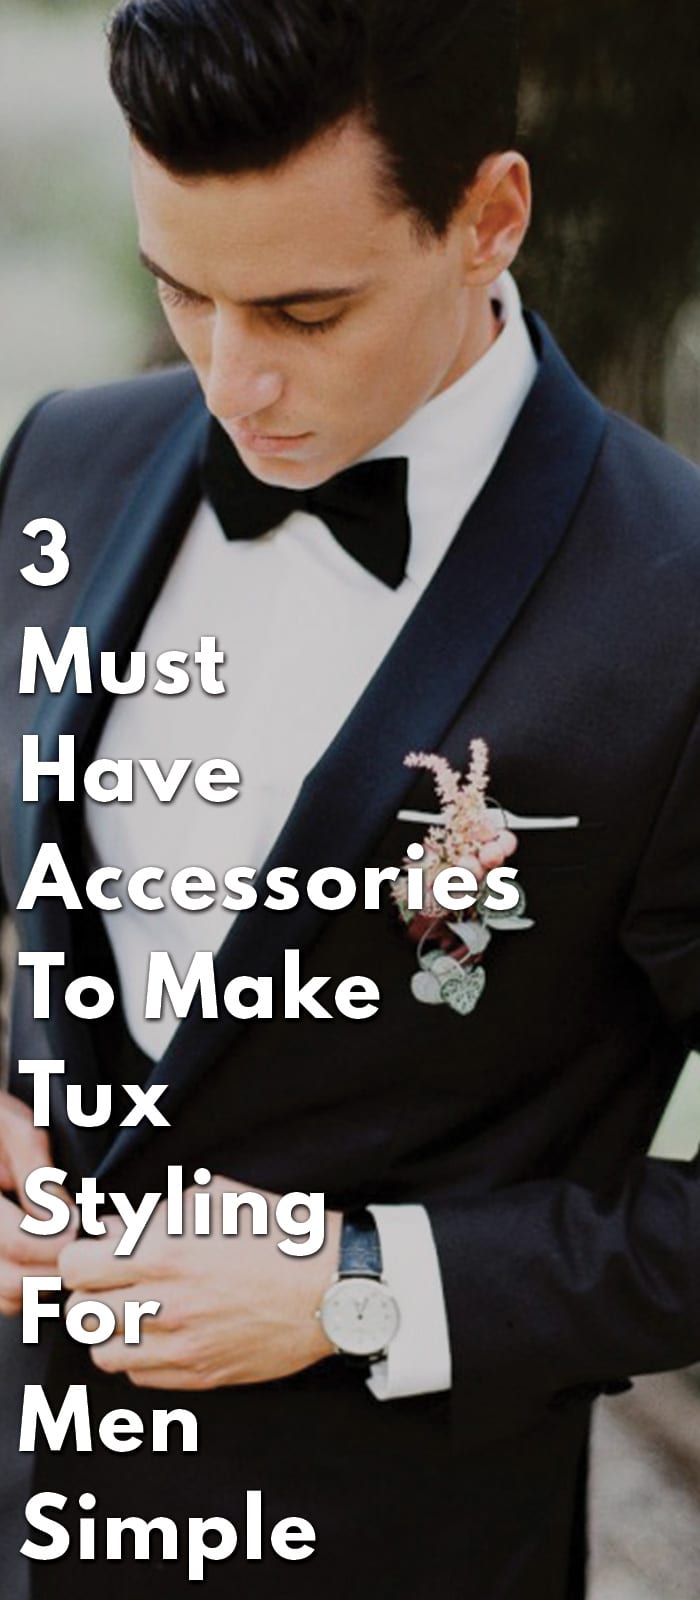 3-Must-Have-Accessories-To-Make-Tux-Styling-For-Men-Simple